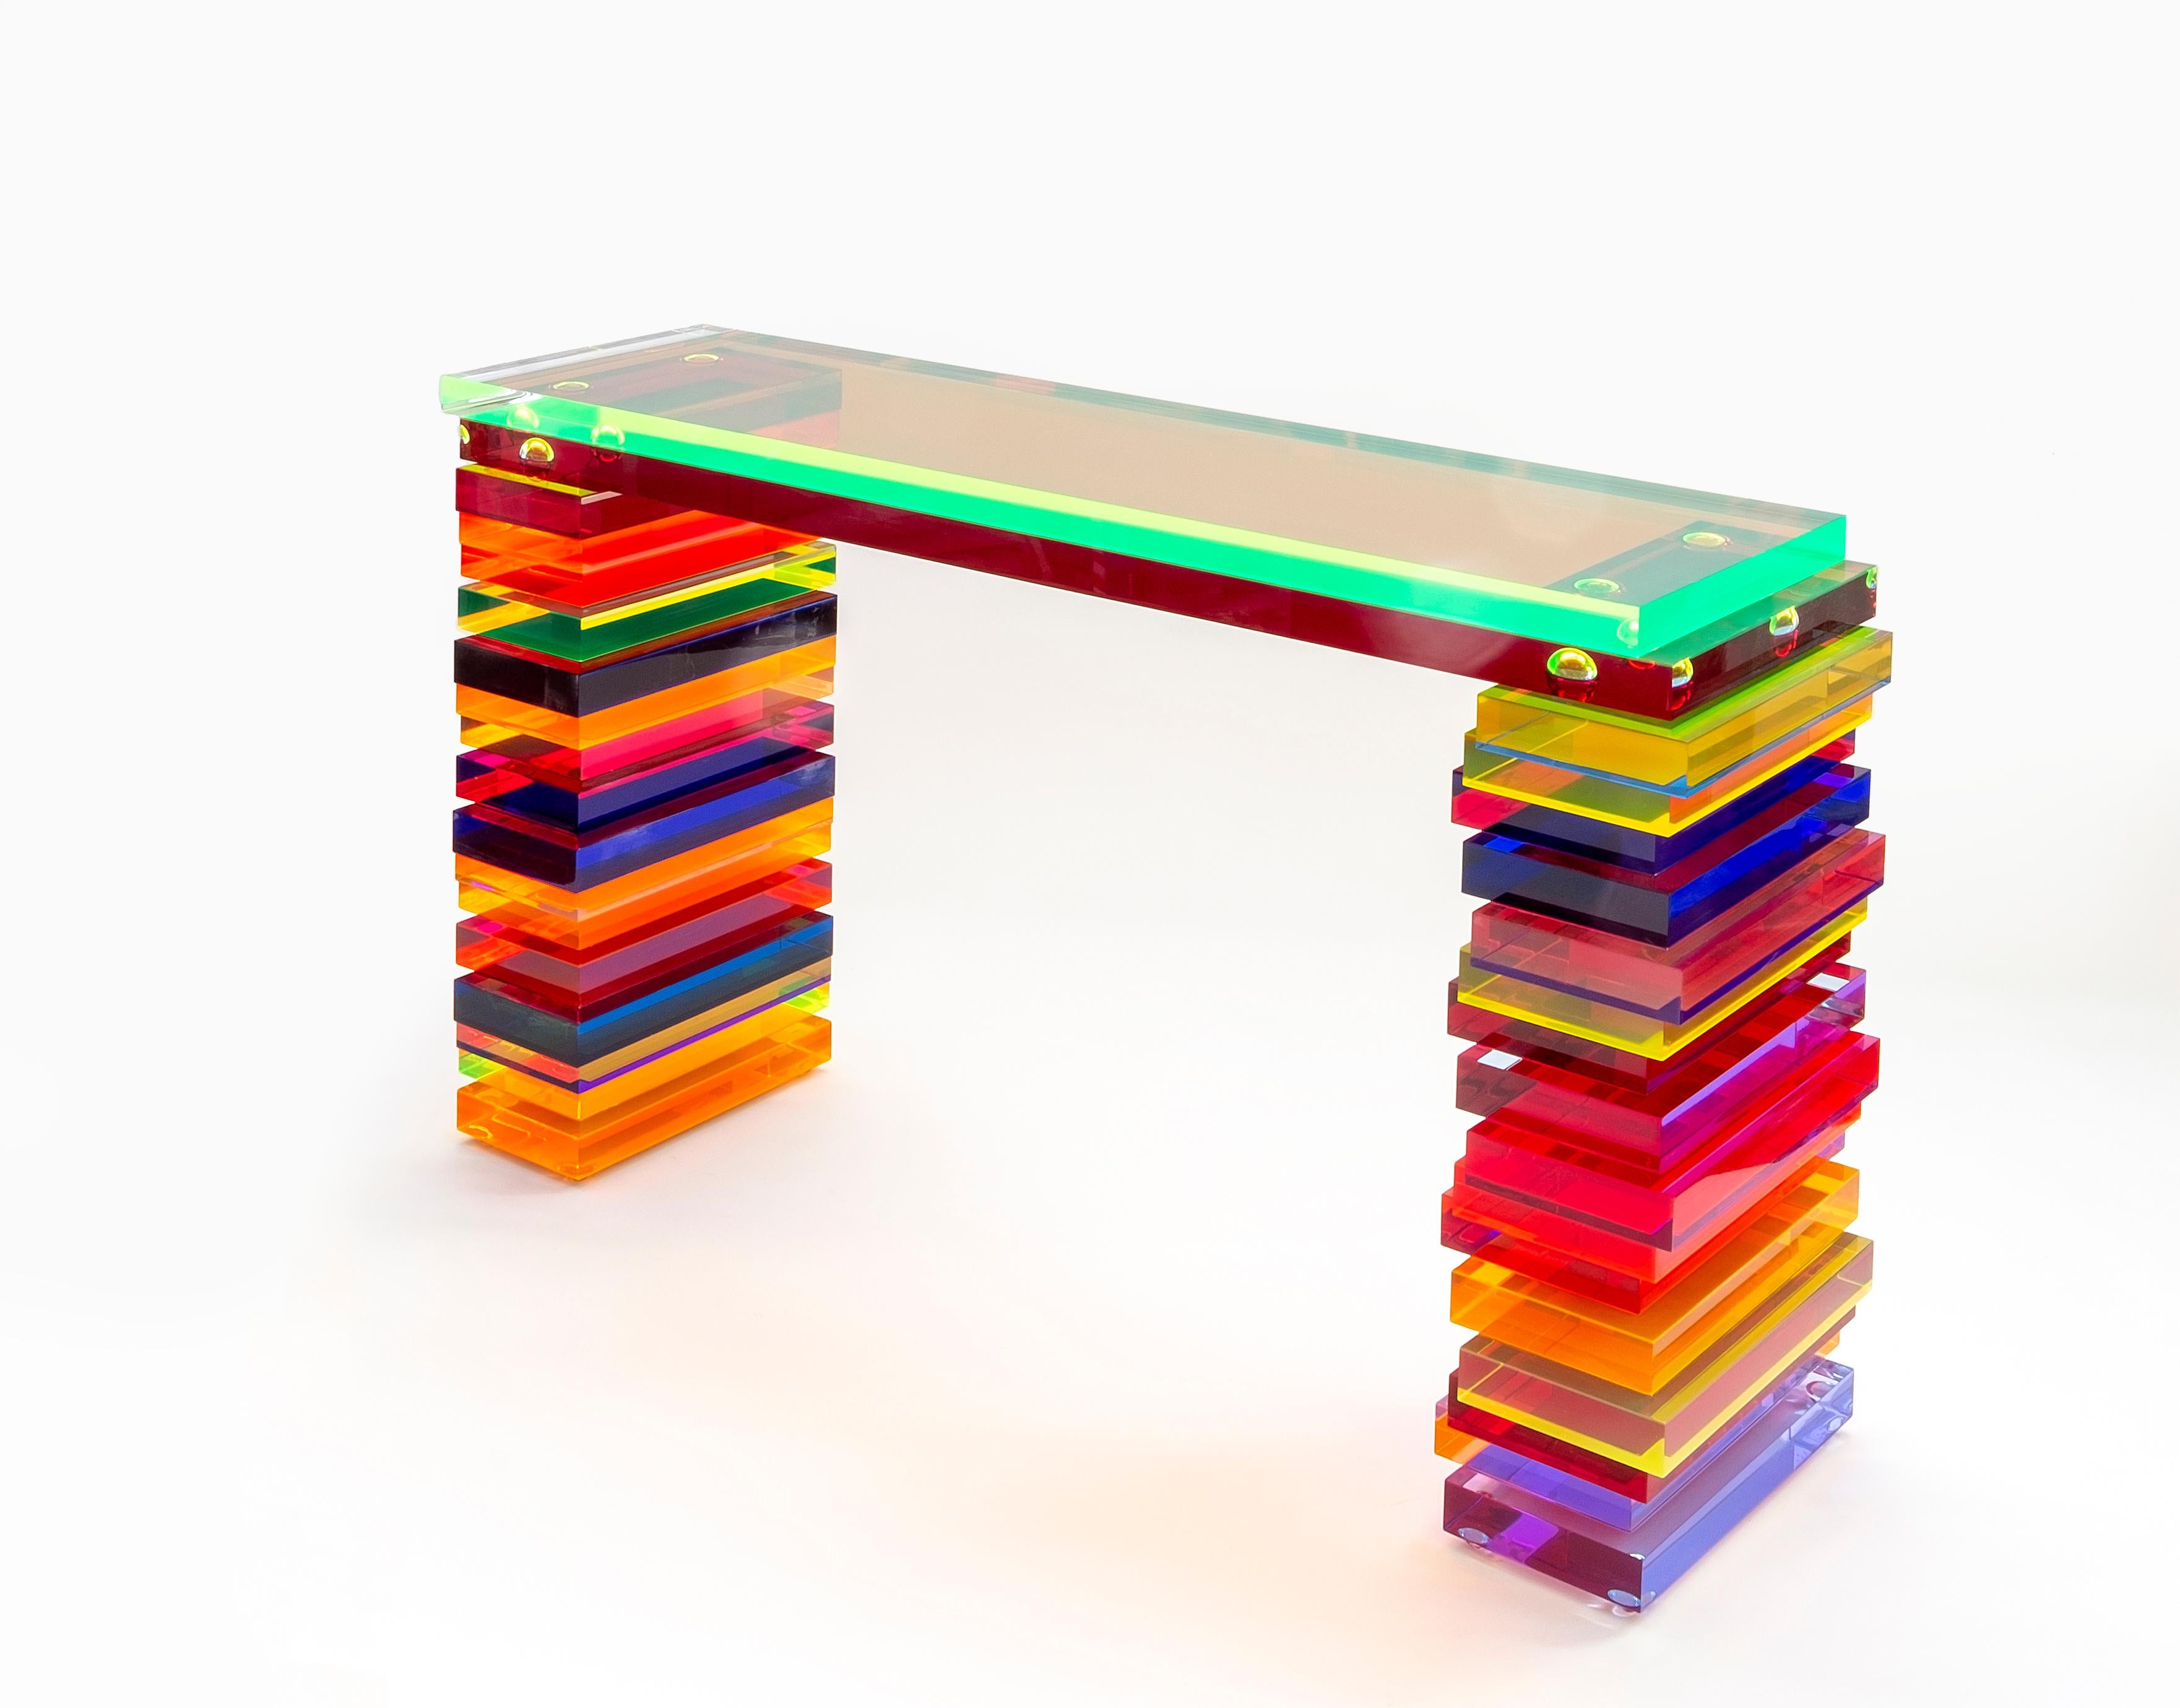 Console Model Disallineata in multi-color plexiglass with an overlap of misaligned rectangular elements
A series of unique pieces designed and produced by Studio Superego.

Biography
Superego editions was born in 2006, performing a constant